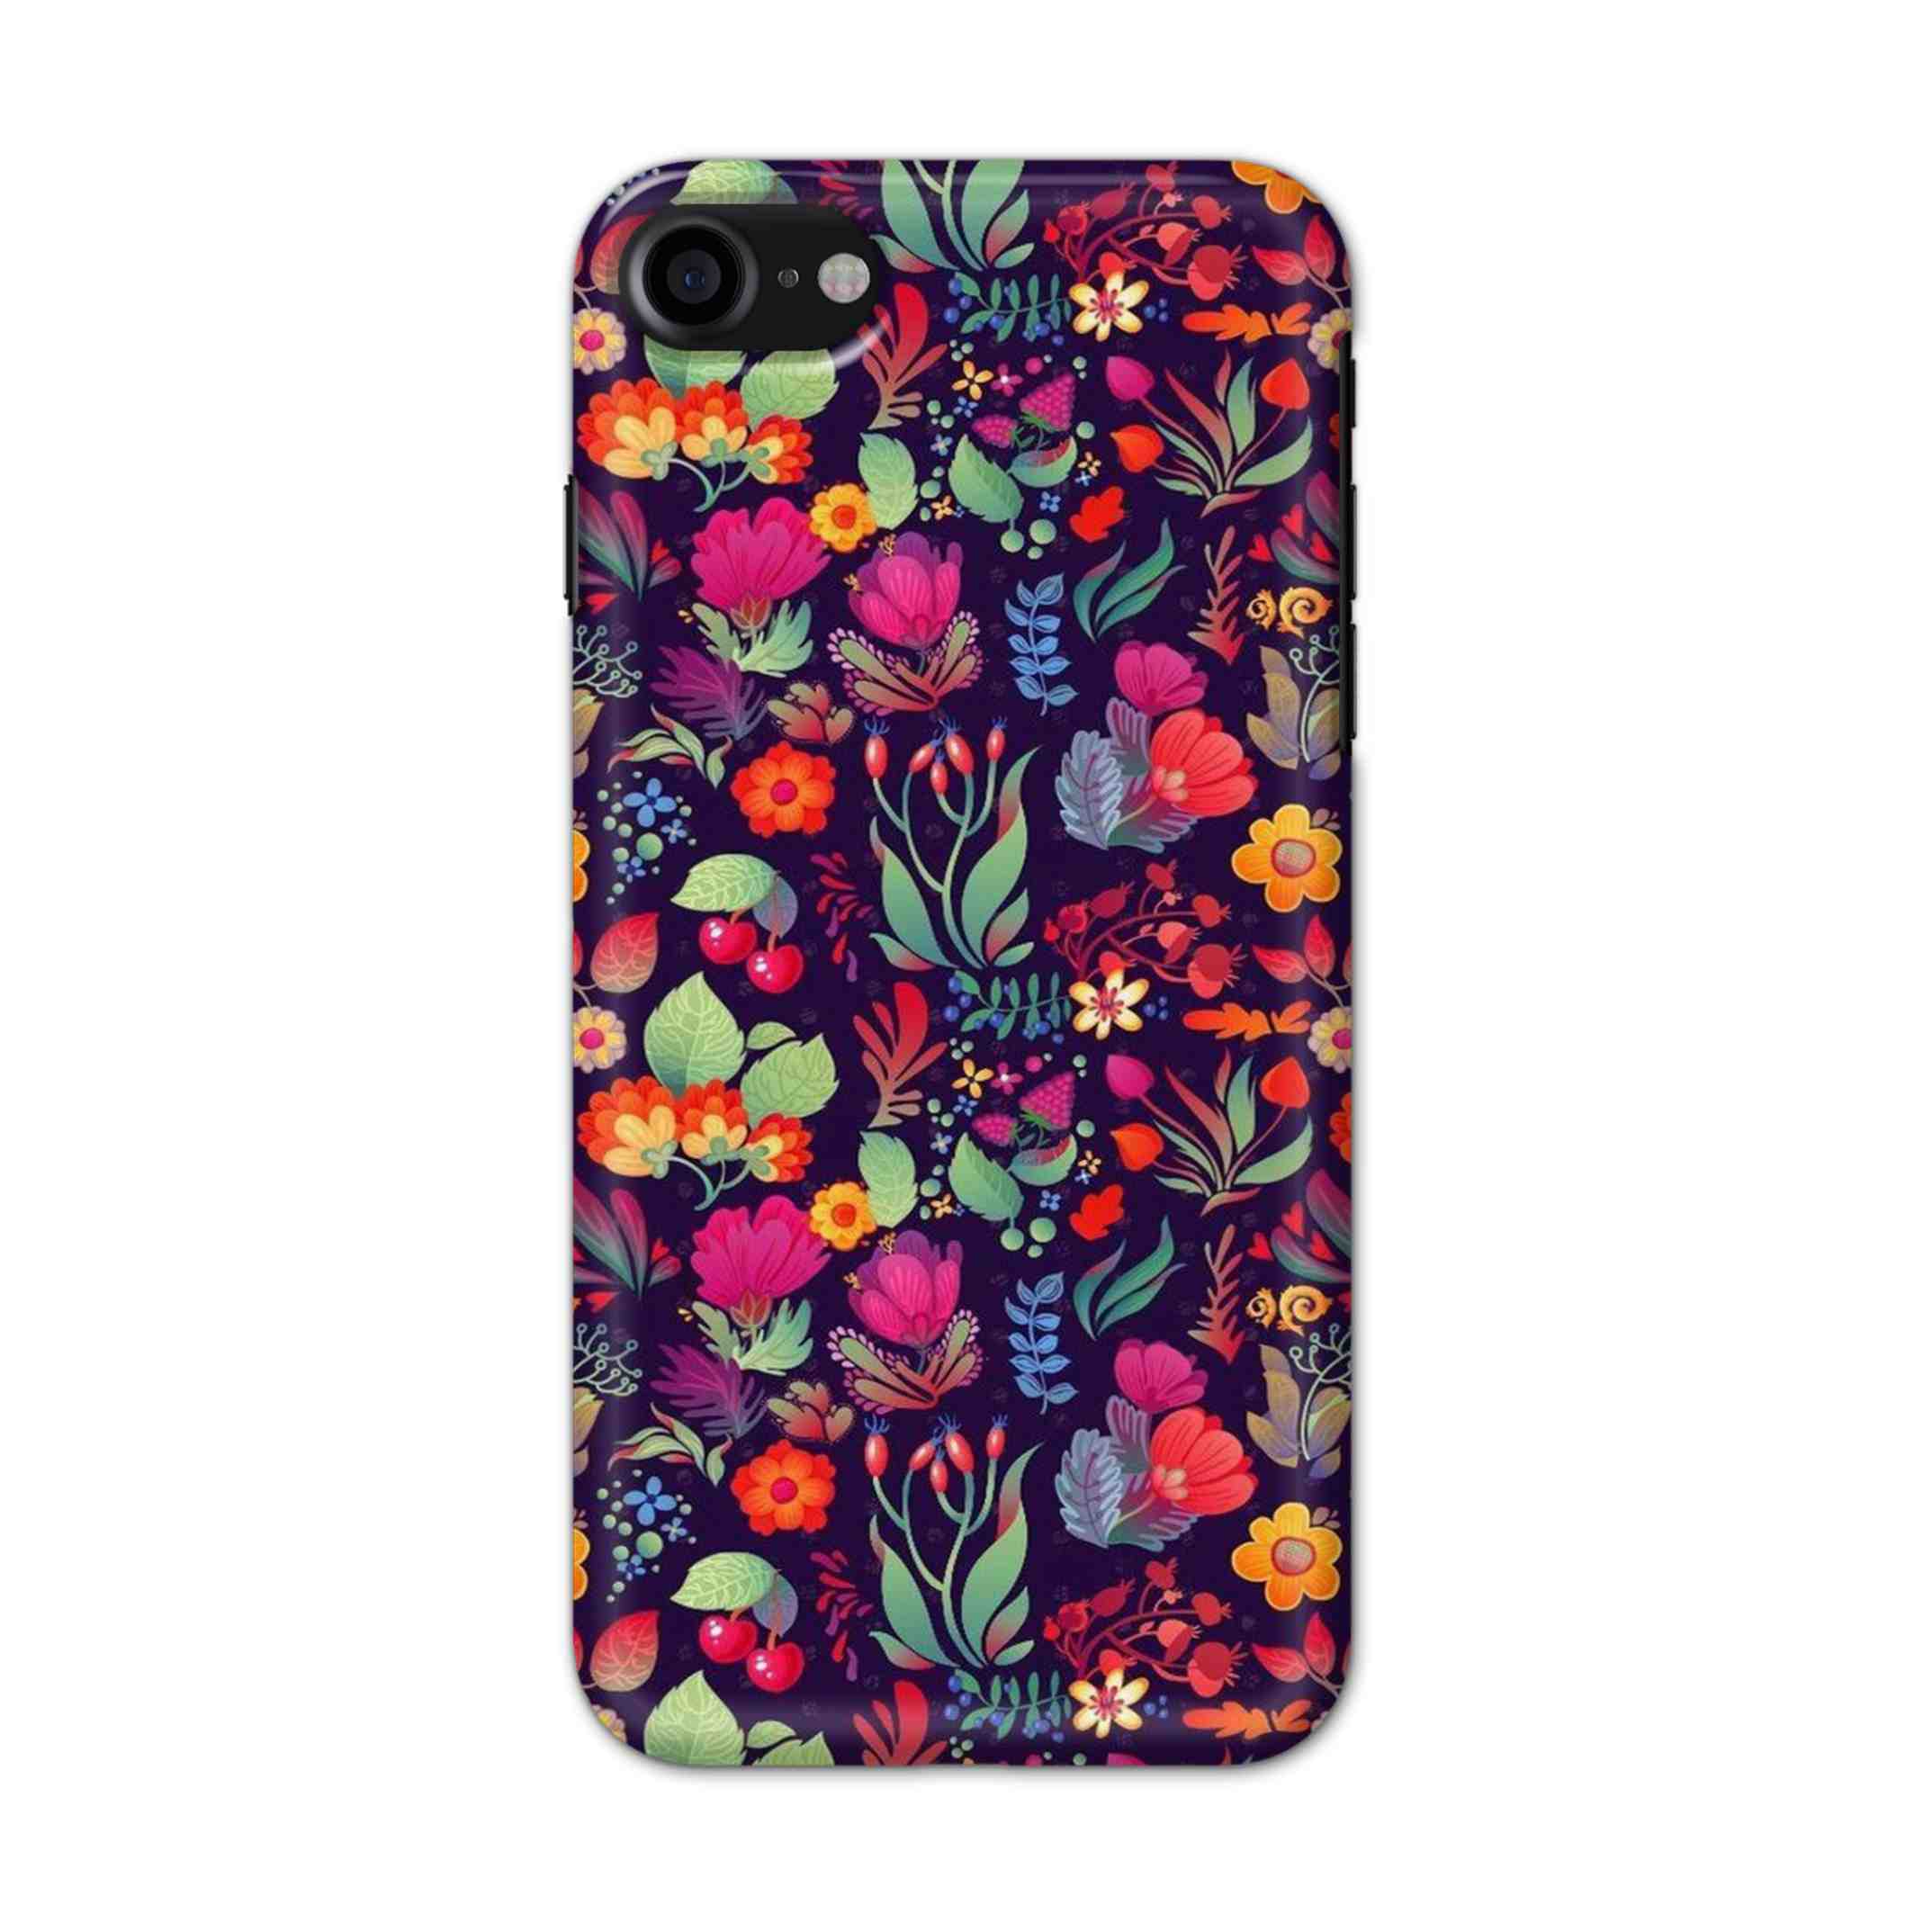 Buy Fruits Flower Hard Back Mobile Phone Case/Cover For iPhone 7 / 8 Online